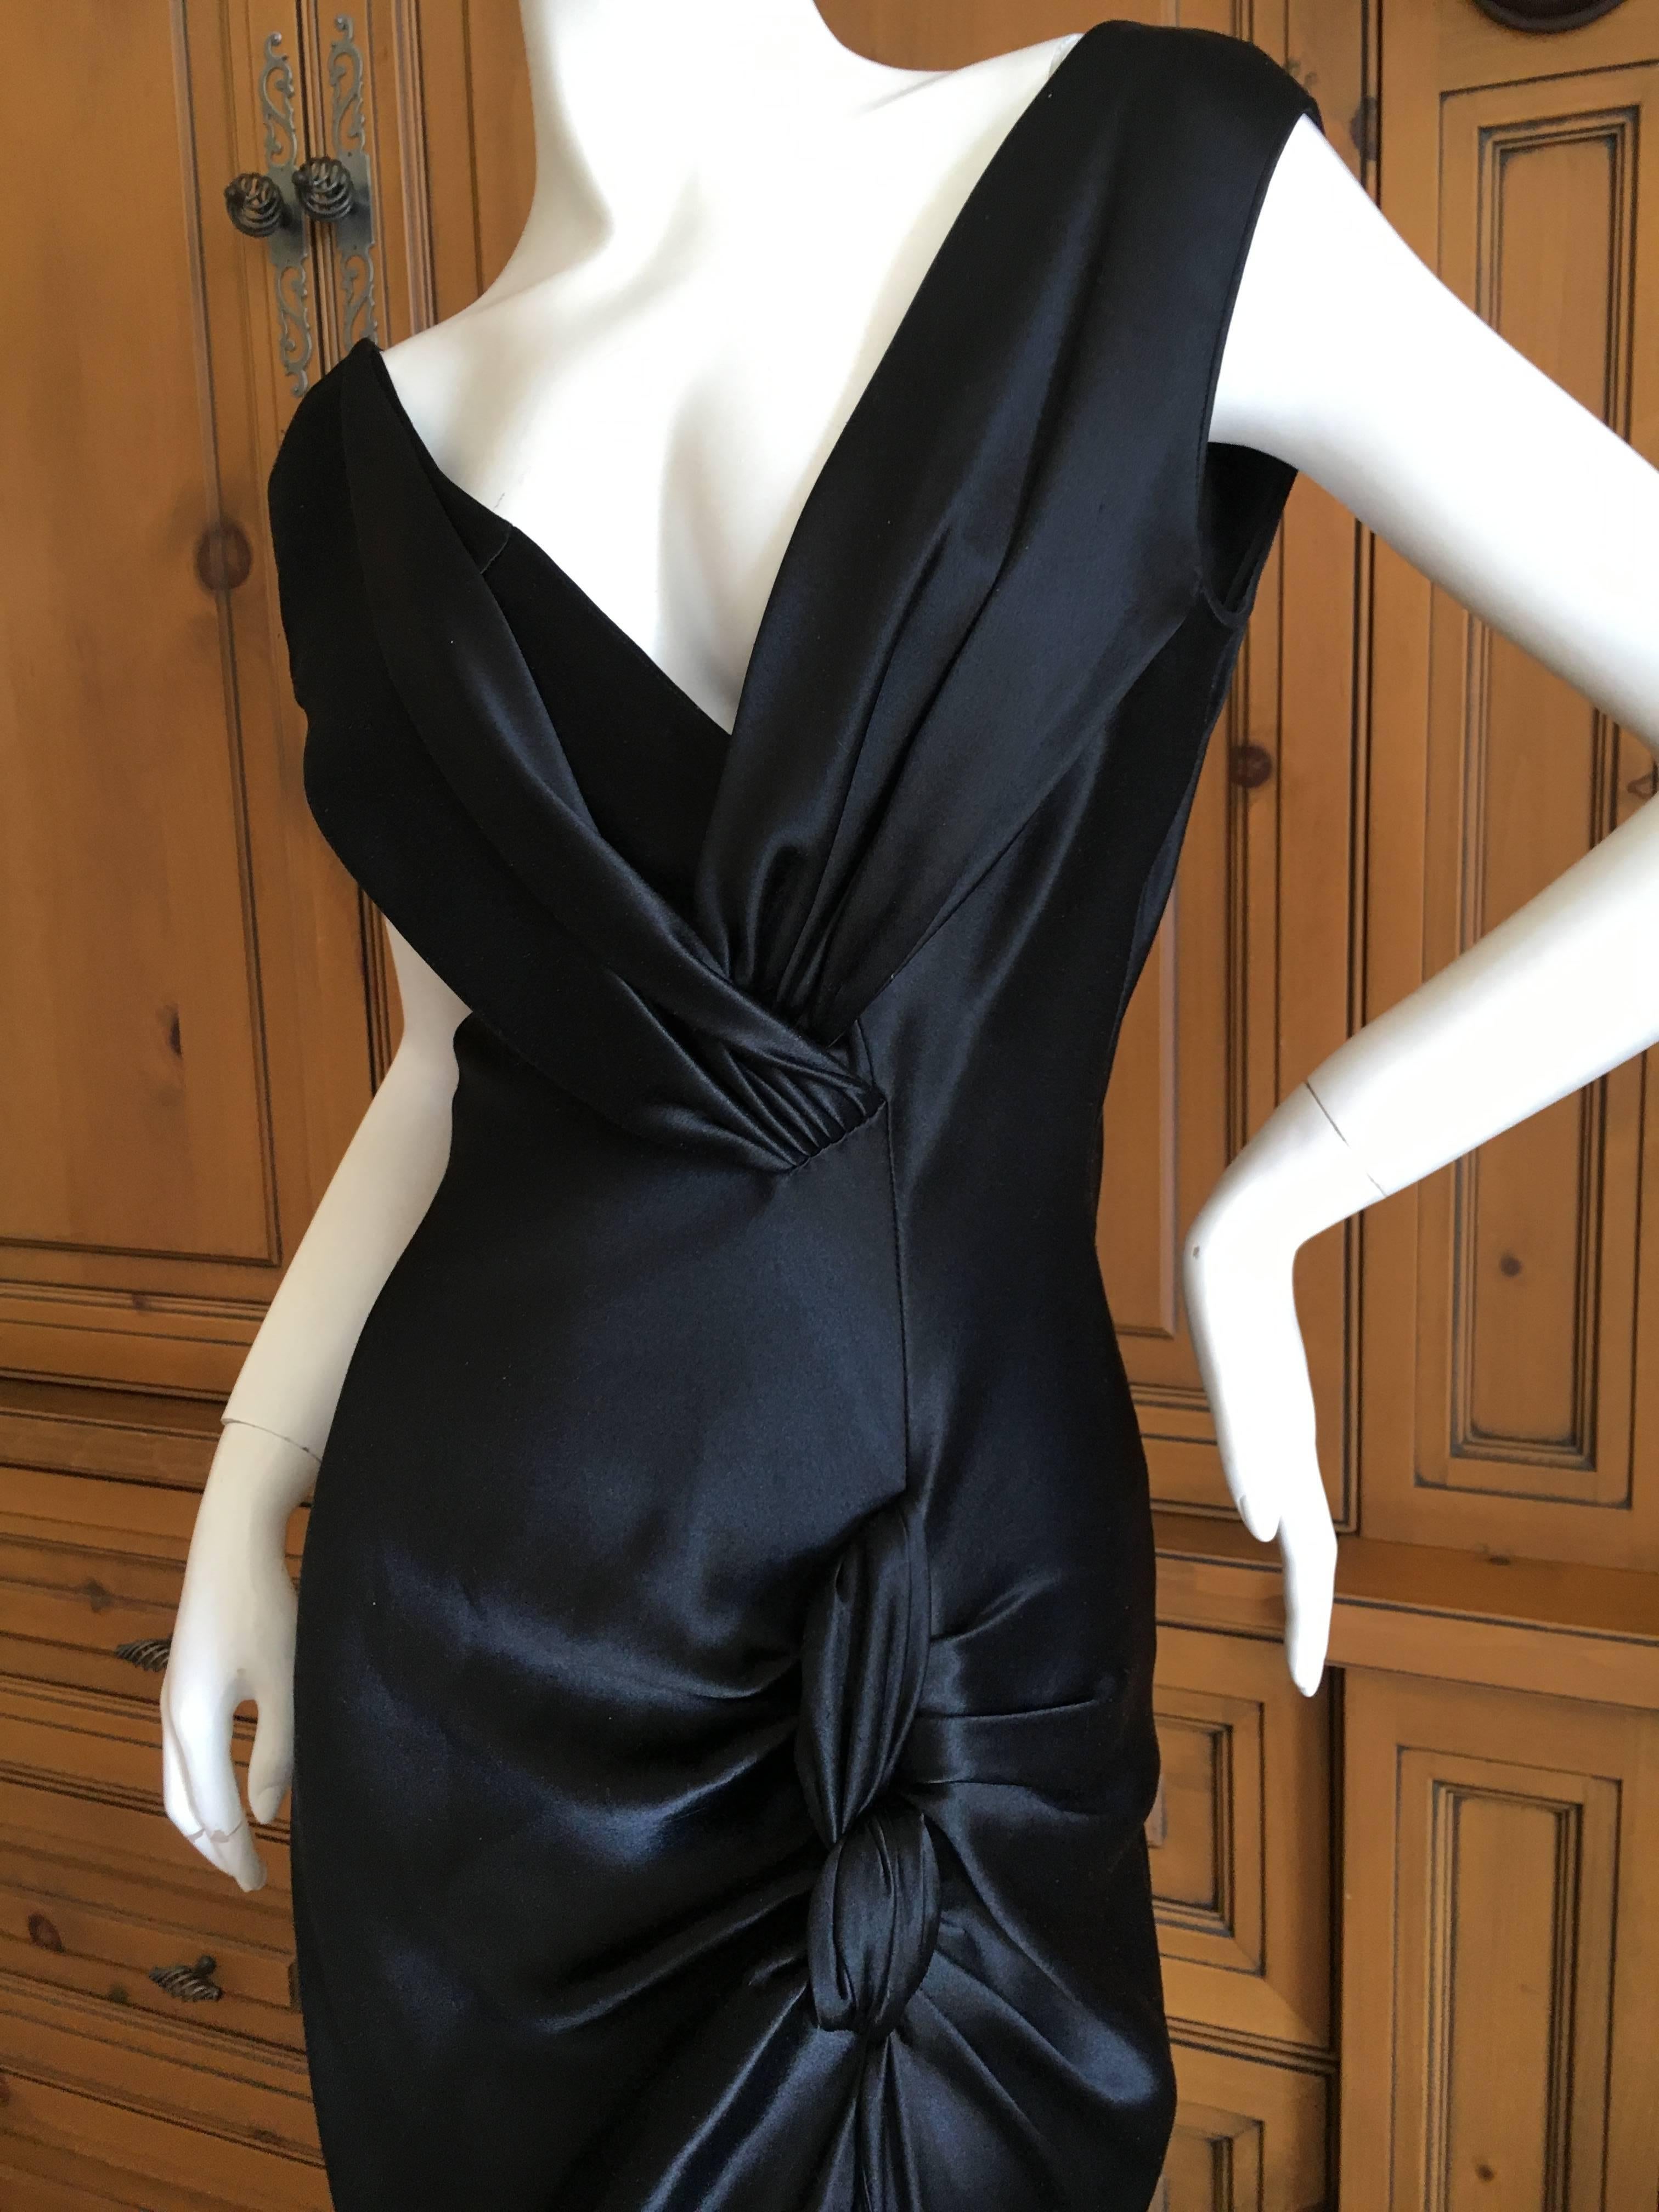 Christian Dior by John Galliano Bias Cut Silk Evening Dress with High Slit.
There is no zipper on this, or tortuous Galliano buttons, it slips over ones head.
Size 36
Bust 38